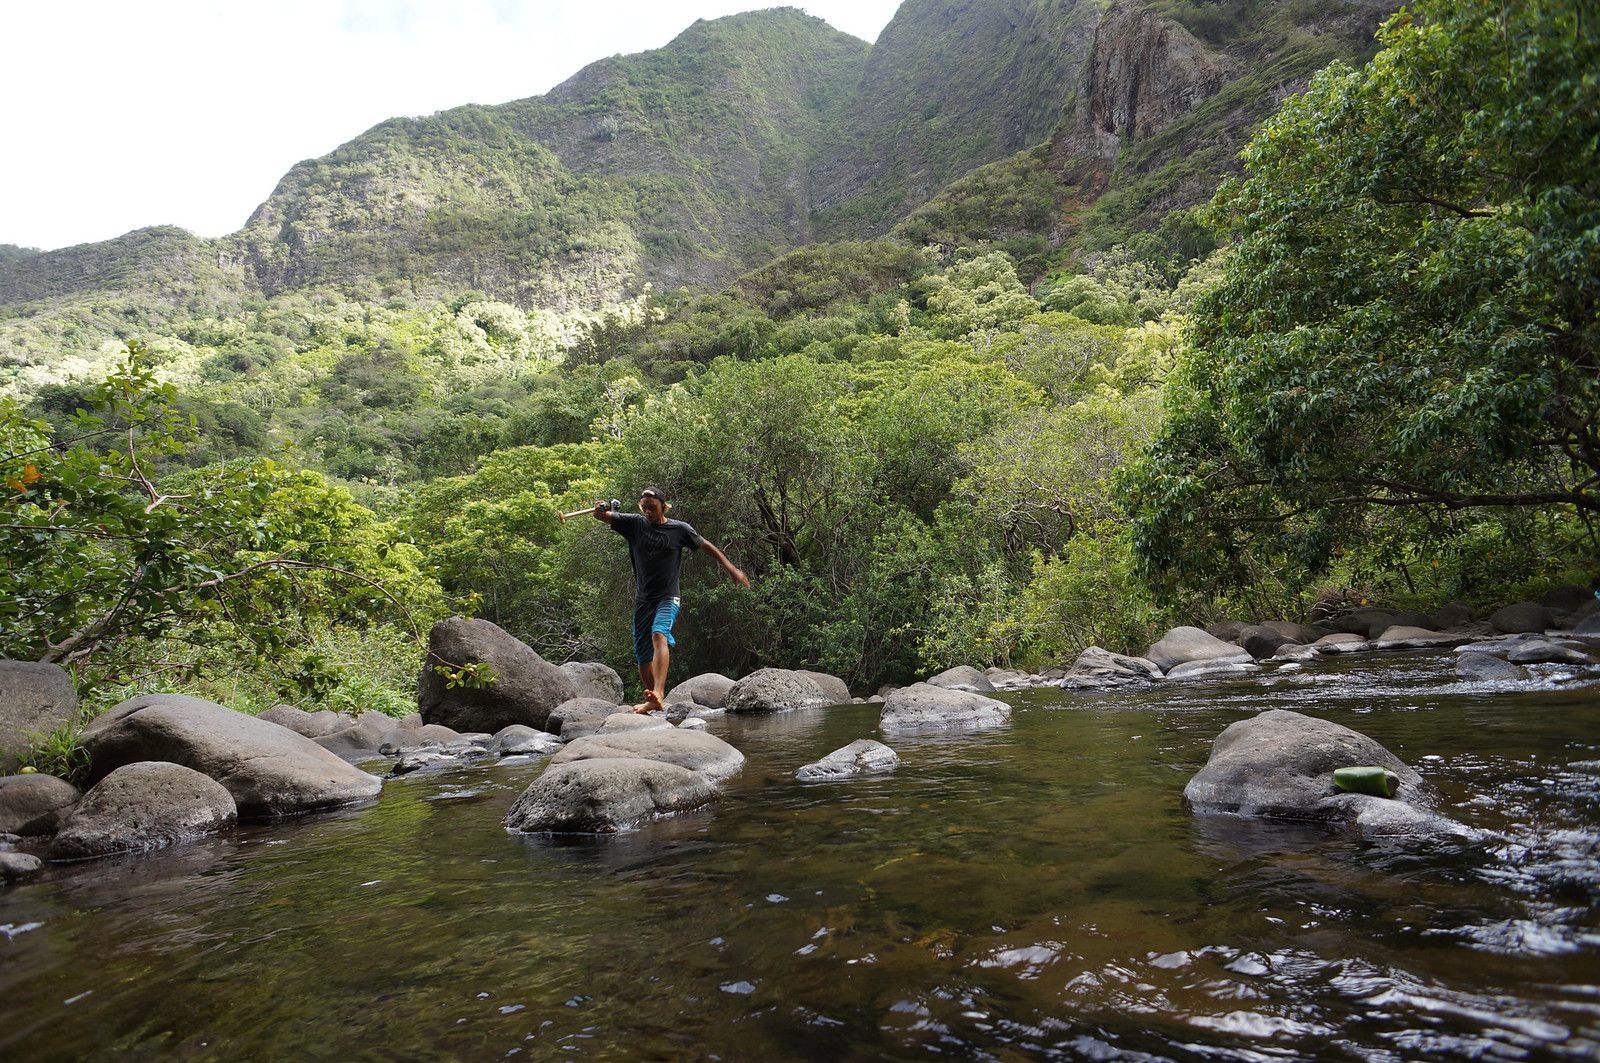 Hiking trail in the Iao Valley.